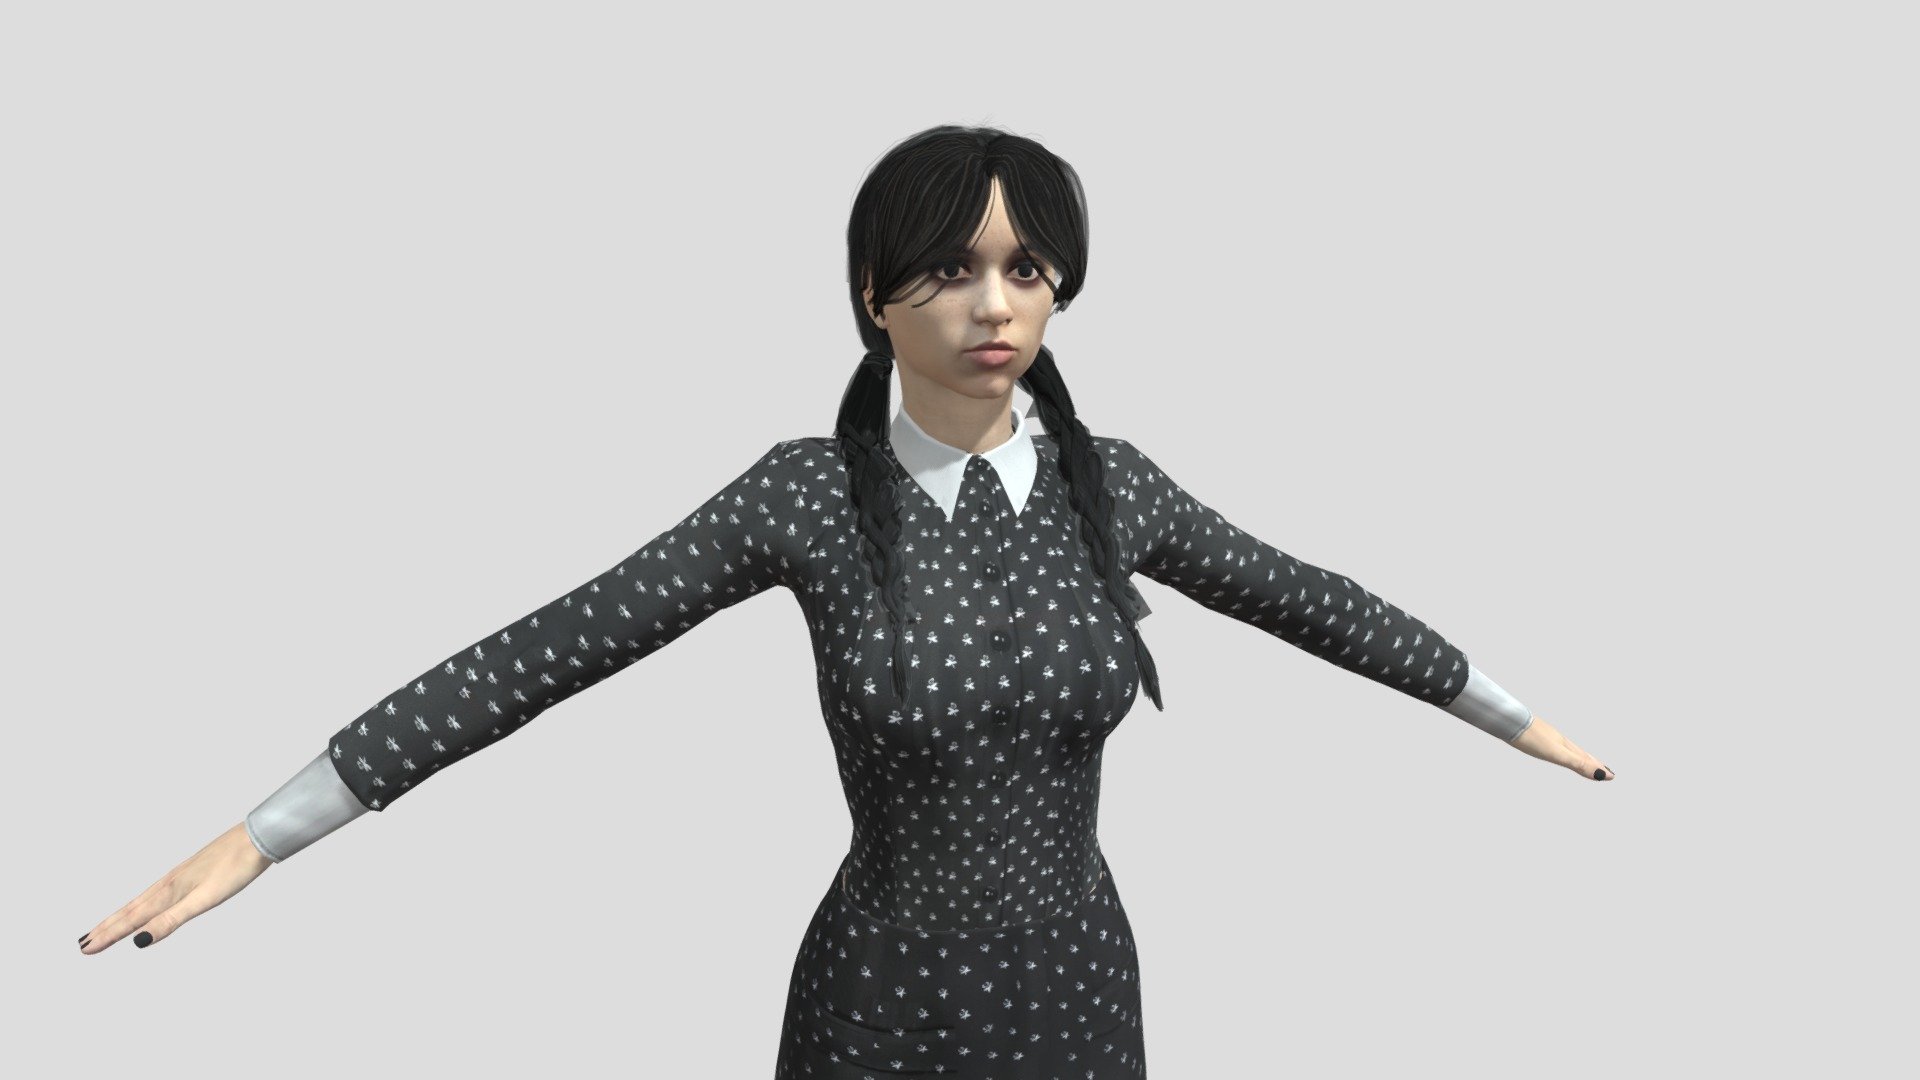 Wednesday Addams rigged 3D model for videogame or 3D animation video

3D model available in this formats: Blend, Fbx, obj, Zbrush

Instagram: @3drinker - Wednesday Addams rigged - 3D model by 3drinker_IG 3d model